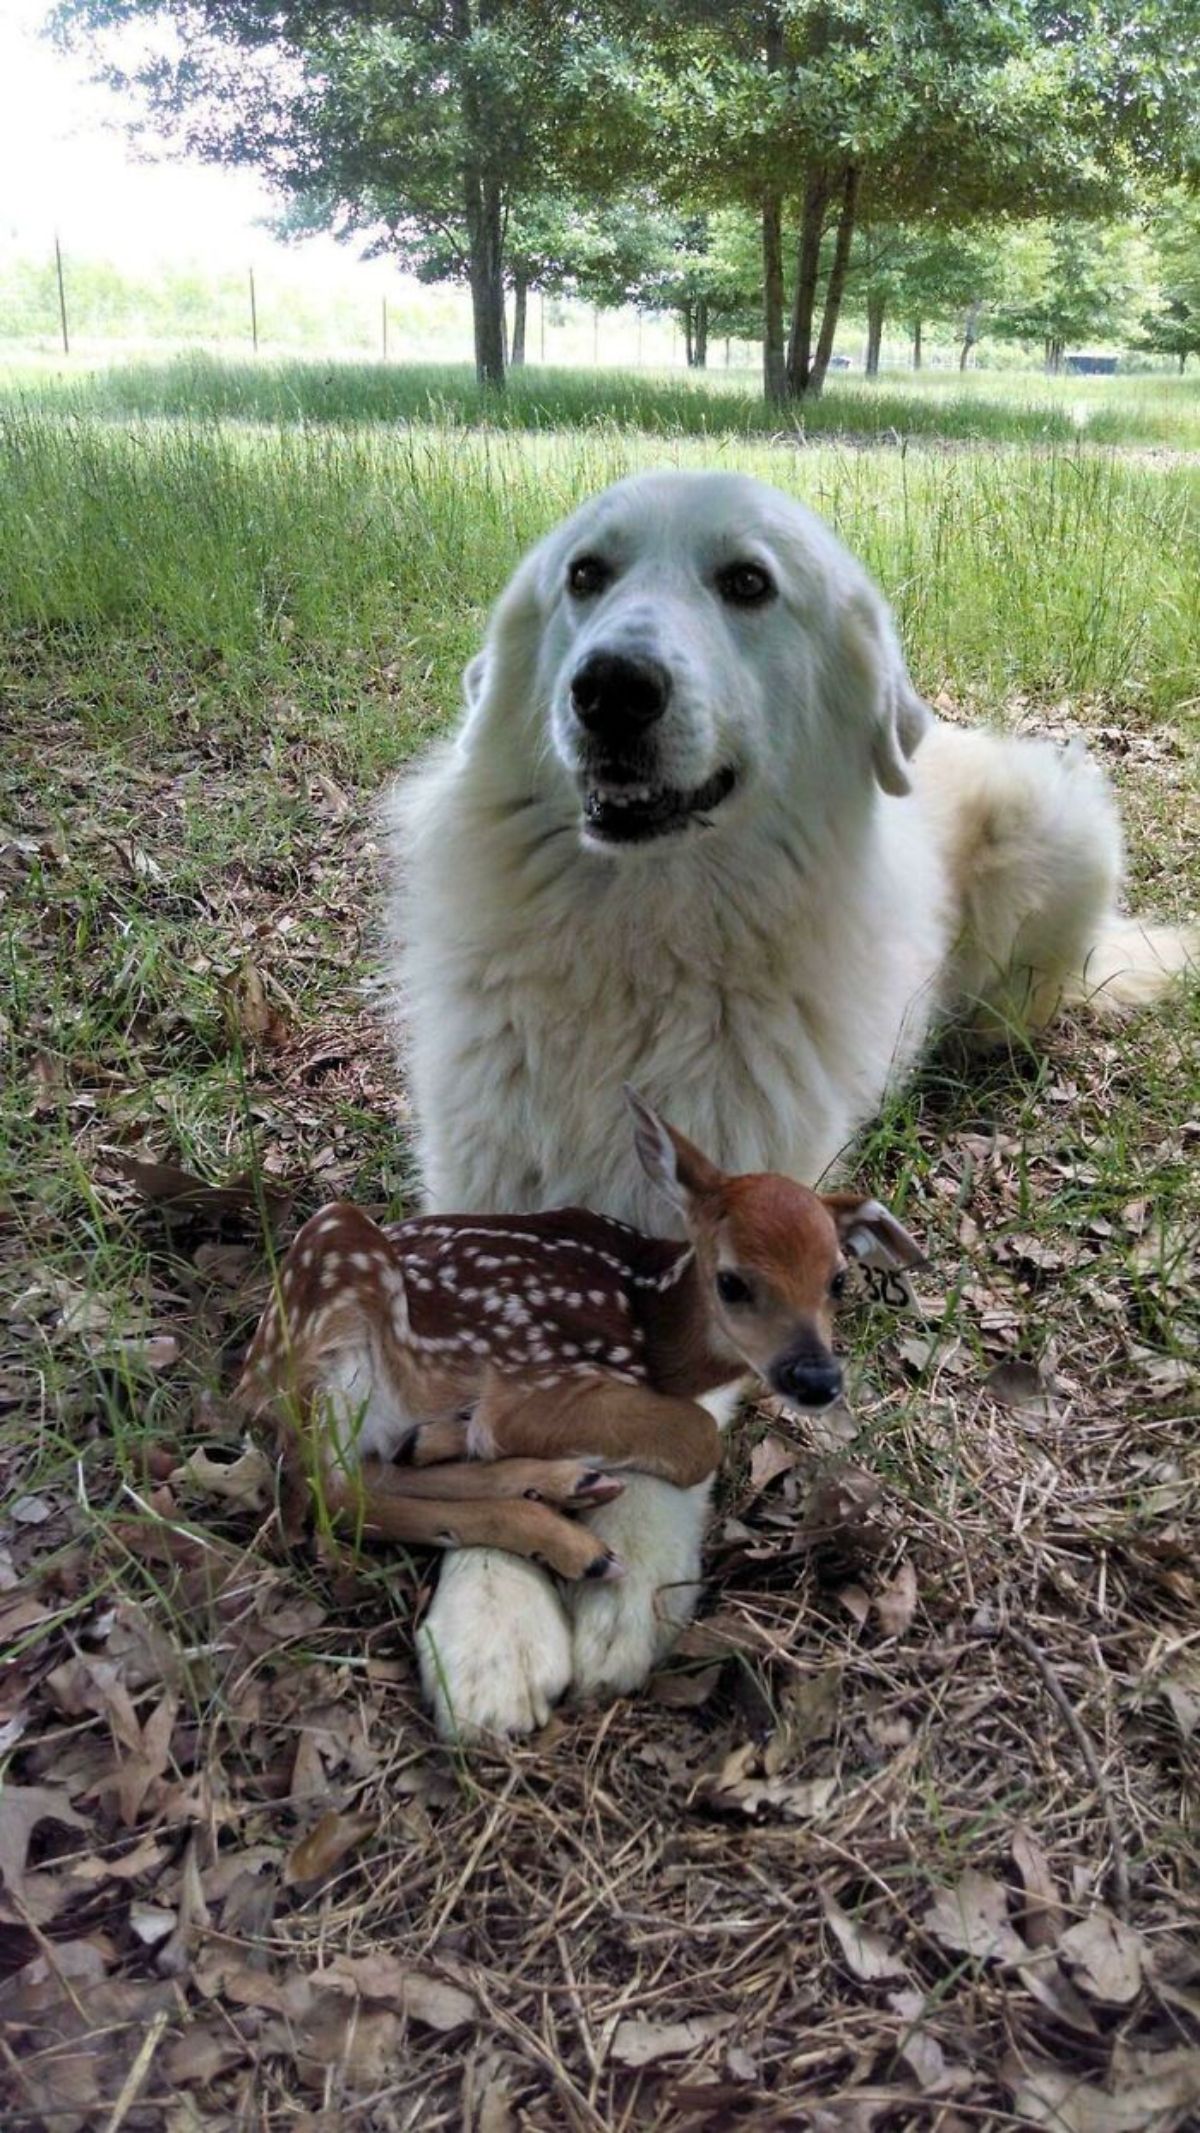 fluffy white dog laying on grass with baby brown deer on laying across the dog's front legs